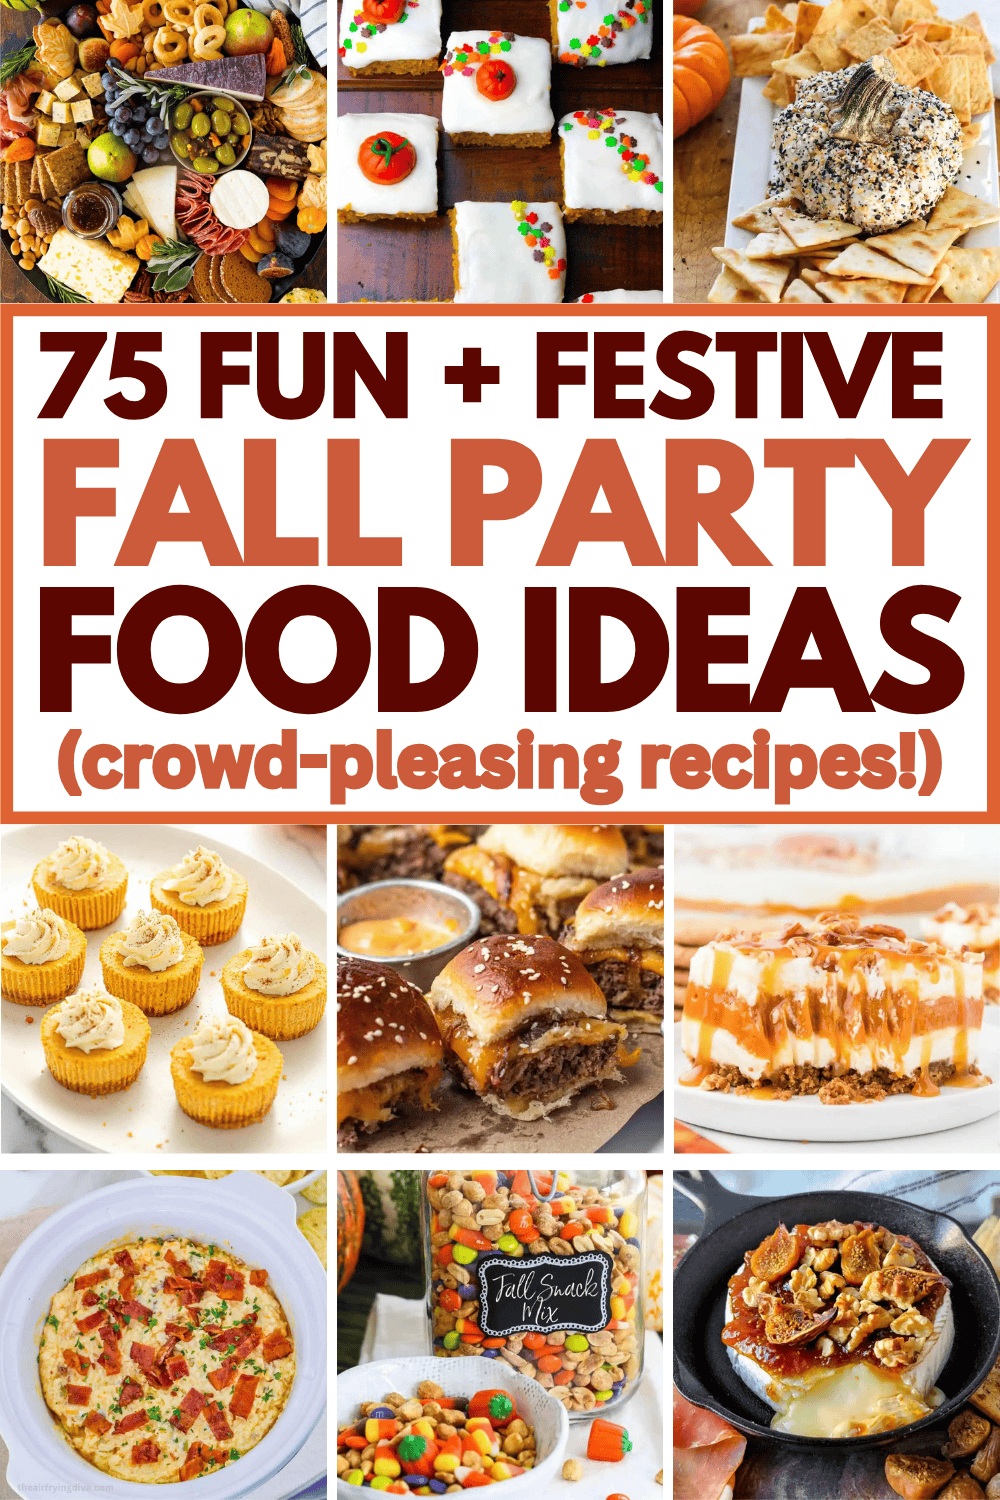 Easy fall party food for a crowd! Plan your autumn party menu with these fun appetizers, side dishes, desserts, and main dishes. The best fall potluck dishes, fall party appetizers for a crowd, fall party menu ideas, party snacks fall, fall themed party food ideas, fall finger foods for party, fall festival backyard party, fall dinner menu party, food for fall birthday party, fall party meal ideas, appetizers for party fall, fall harvest party, bonfire food ideas, fall party food and drinks